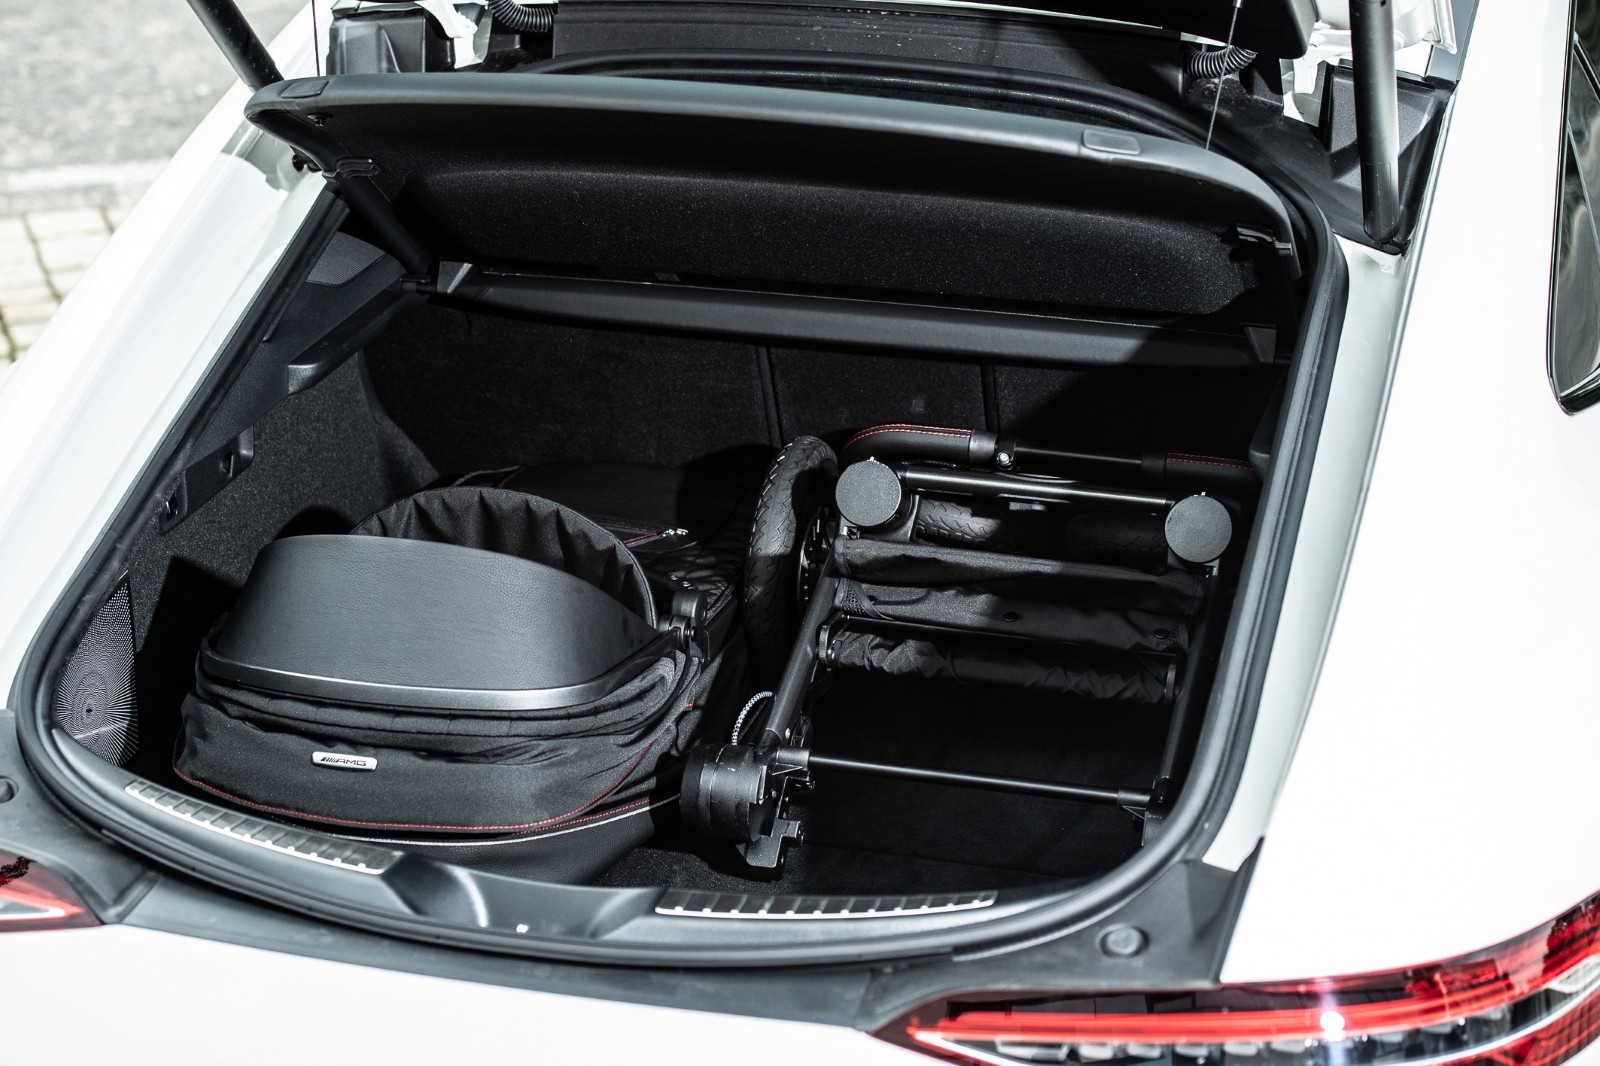 mercedes-benz-brings-amg-comfort-luxury-and-safety-to-hartan-baby-strollers_3